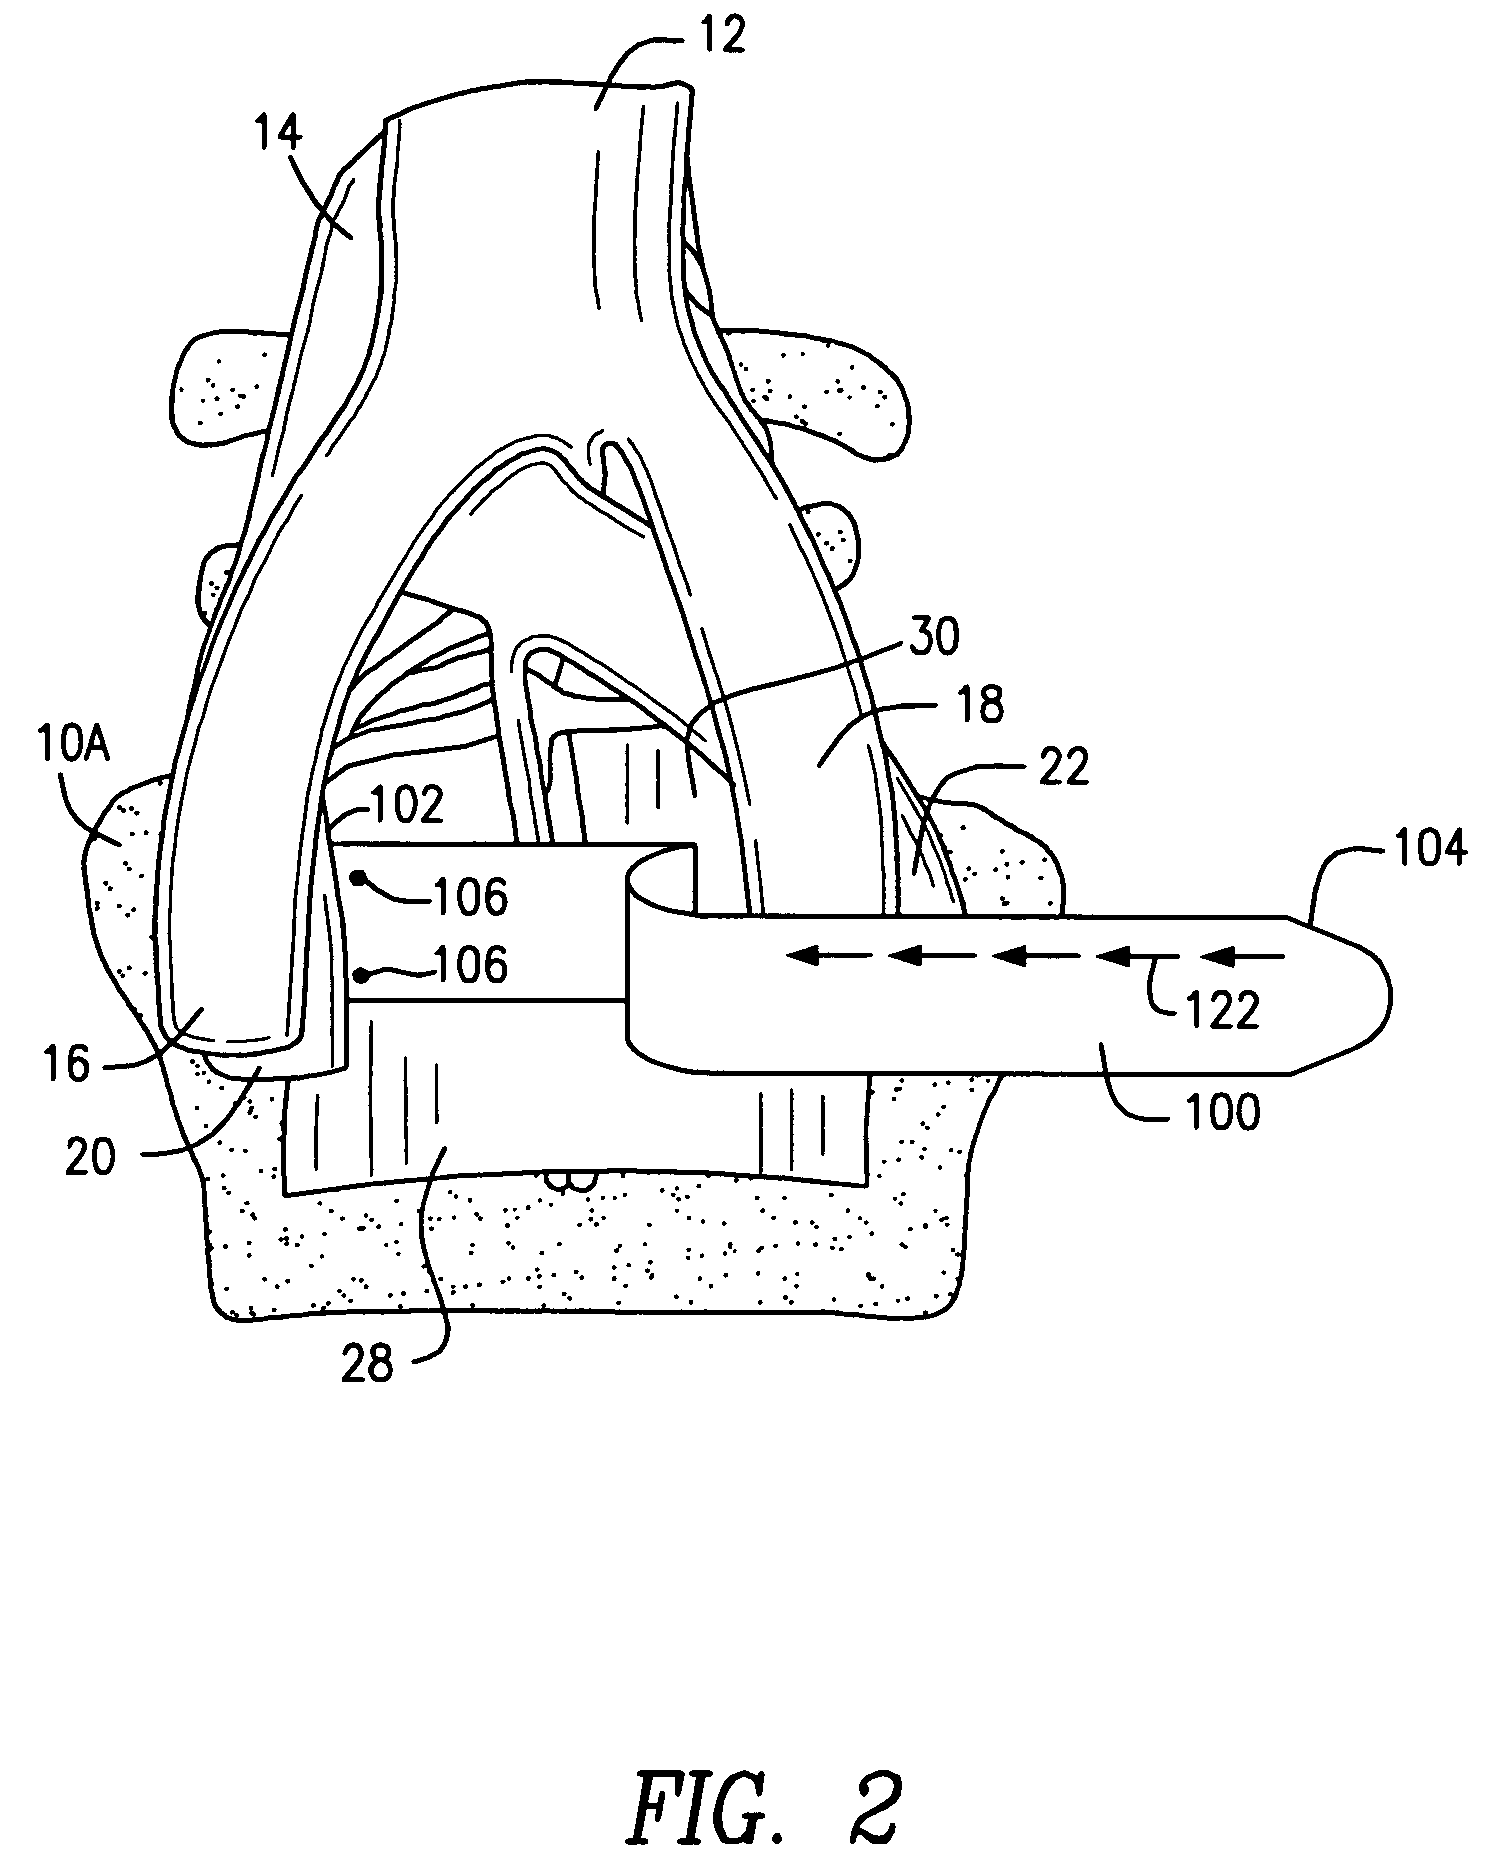 Methods and apparatus for vascular protection in spinal surgery